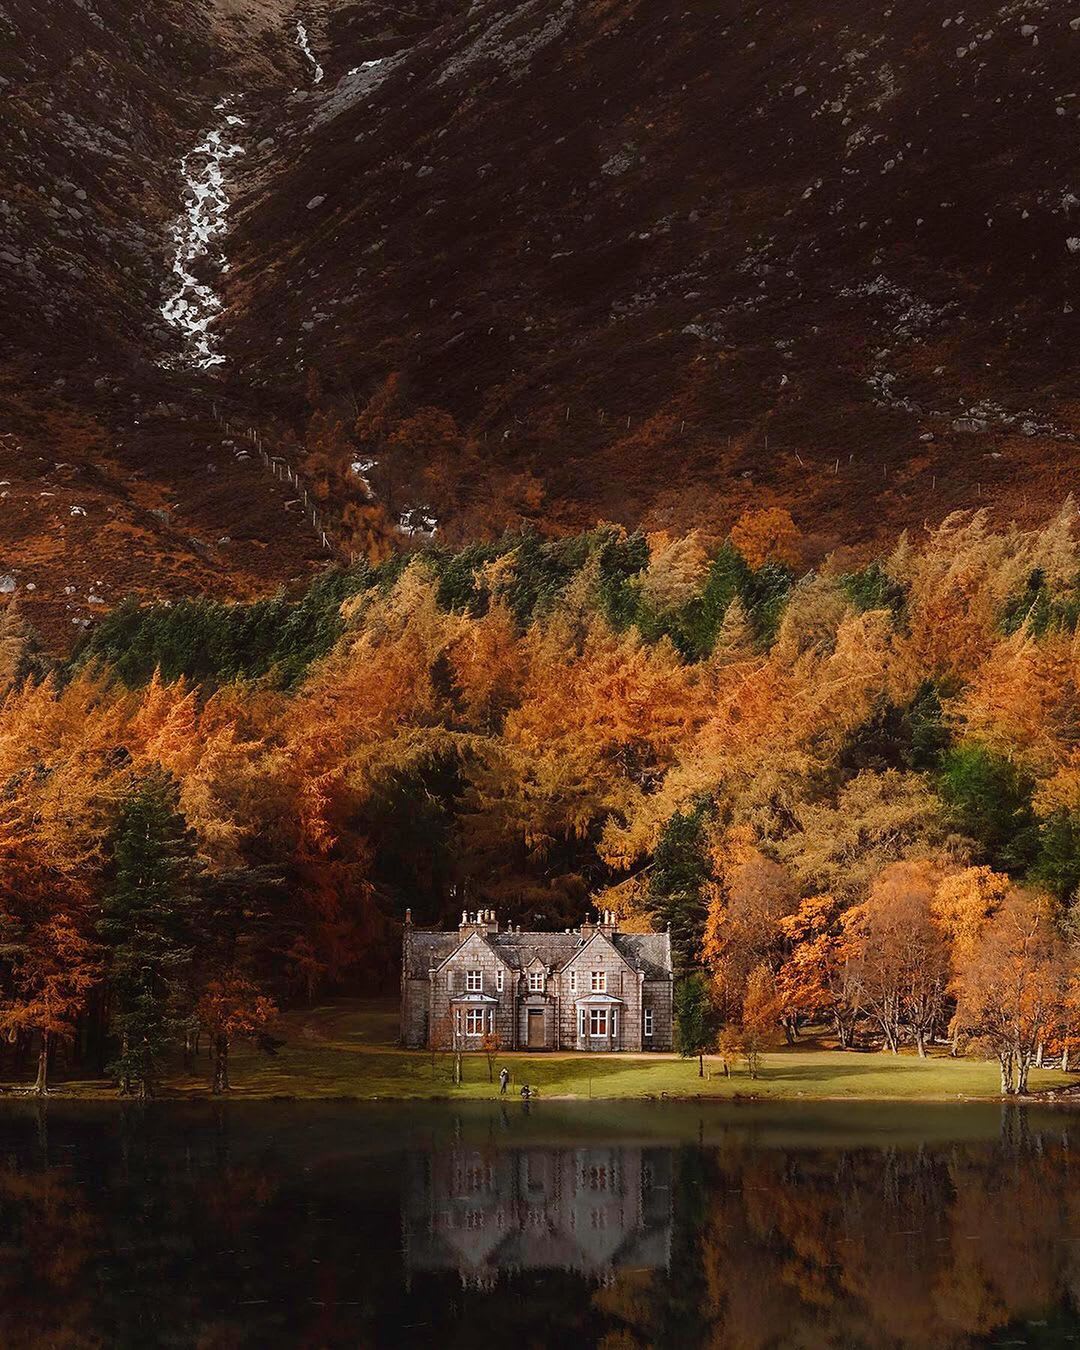 Glas-allt-Shiel, a 18th century lodge built by Queen Victoria on the shores of Loch Muick, Aberdeenshire, Scotland.